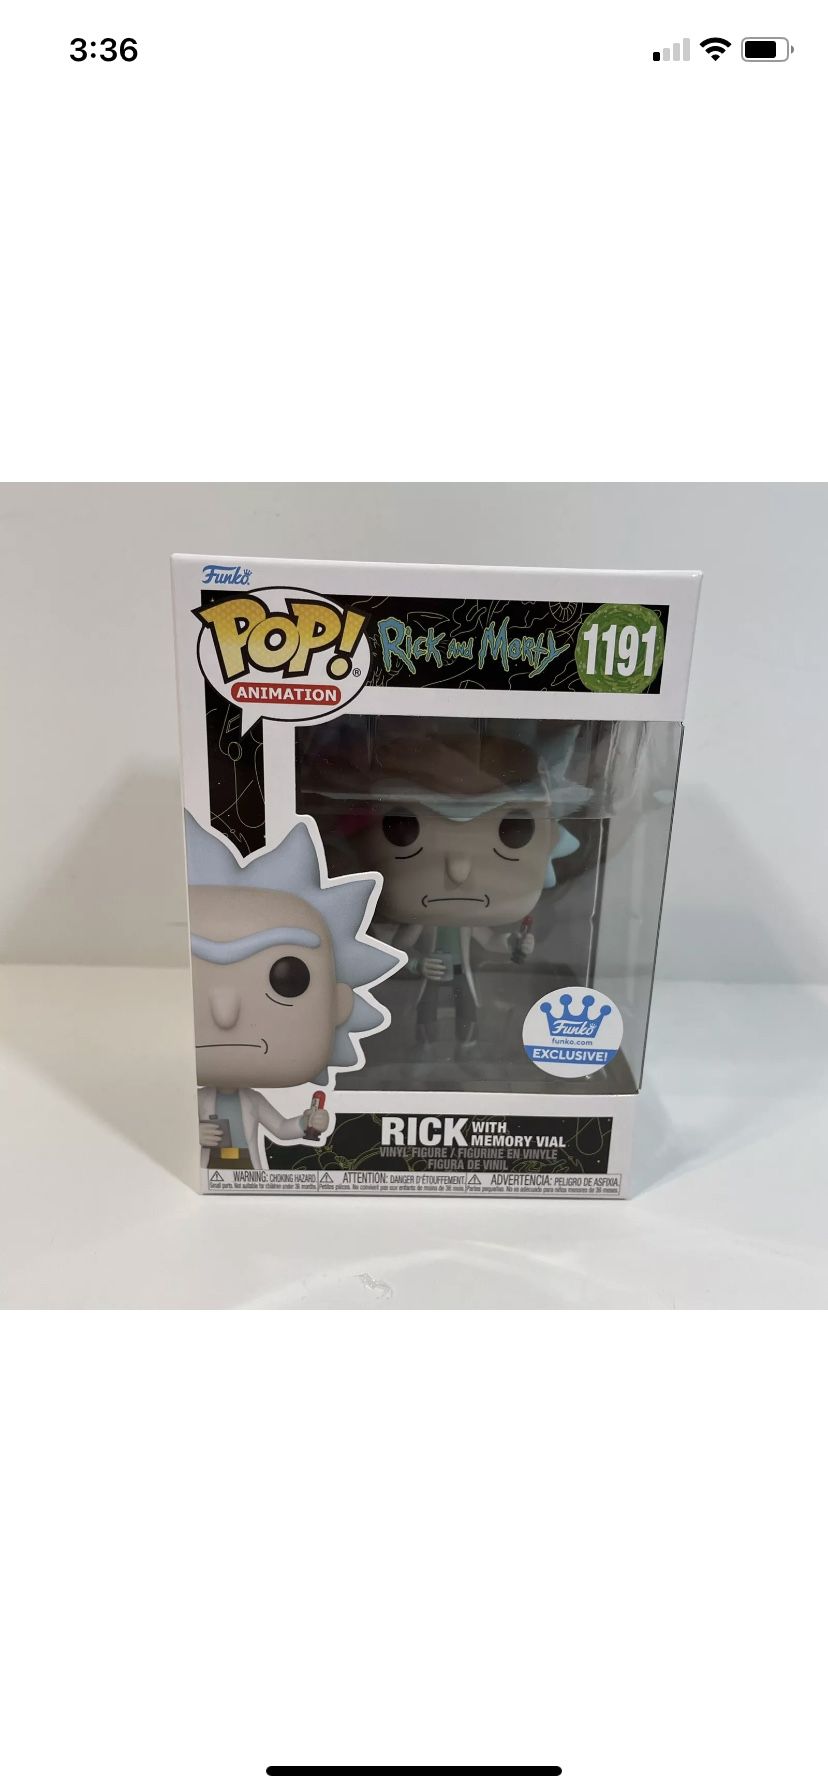 Funko Pop Animation Rick and Morty Rick with Memory Vial #1191 Funko Shop Excl